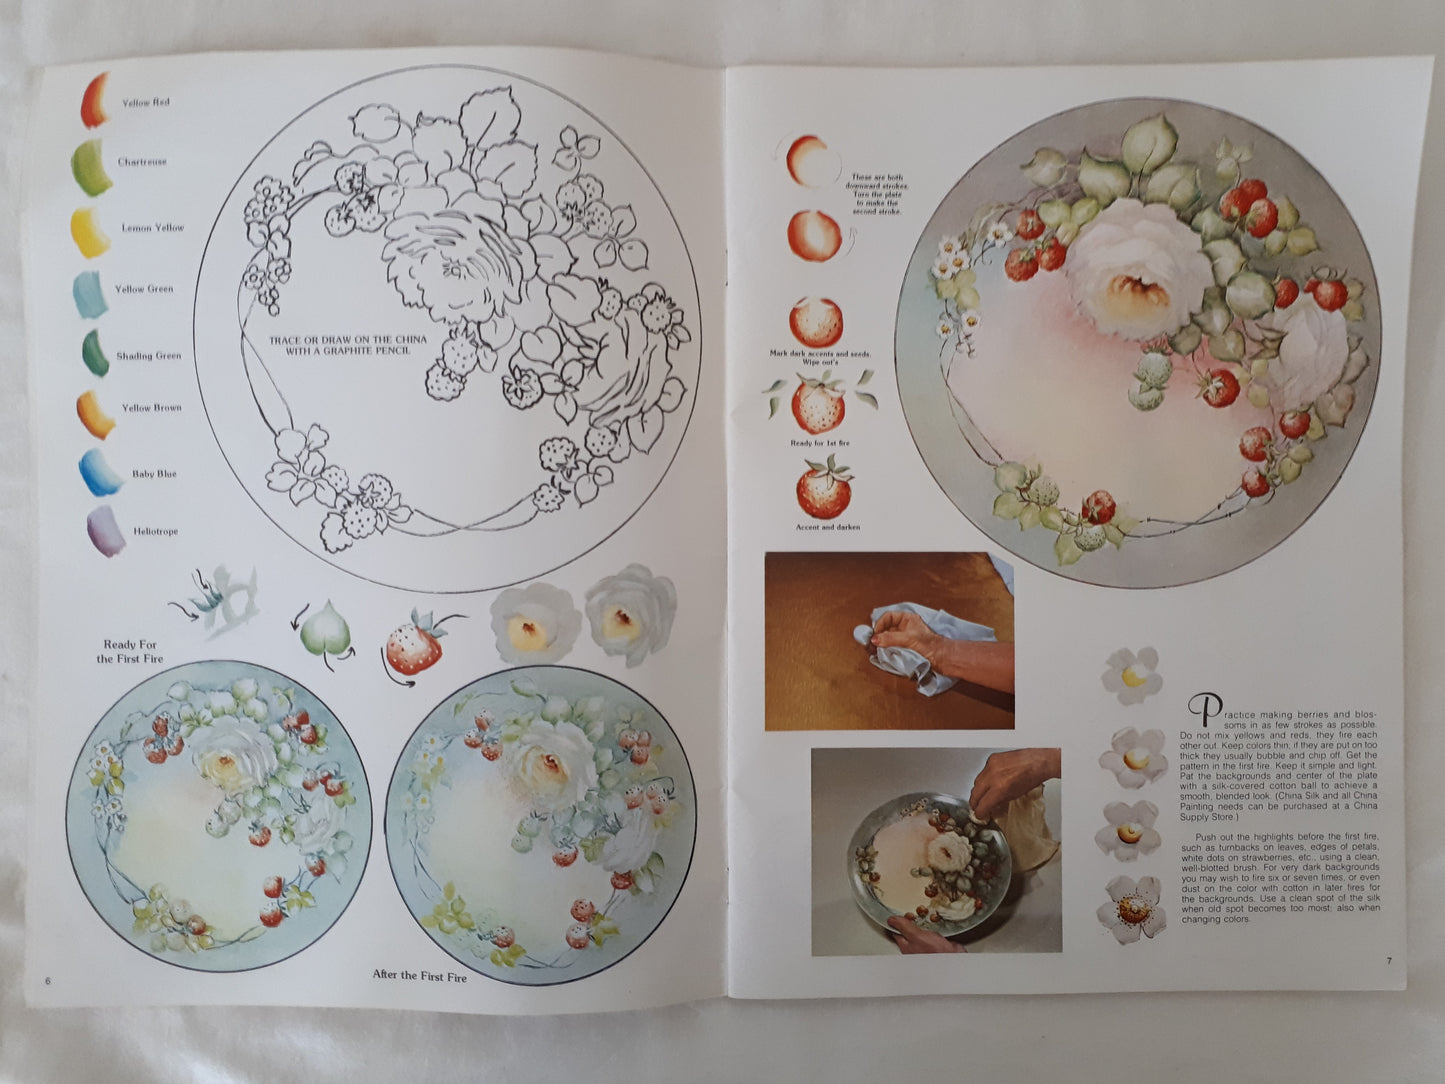 How to Paint on China and Porcelain by Lola Ades